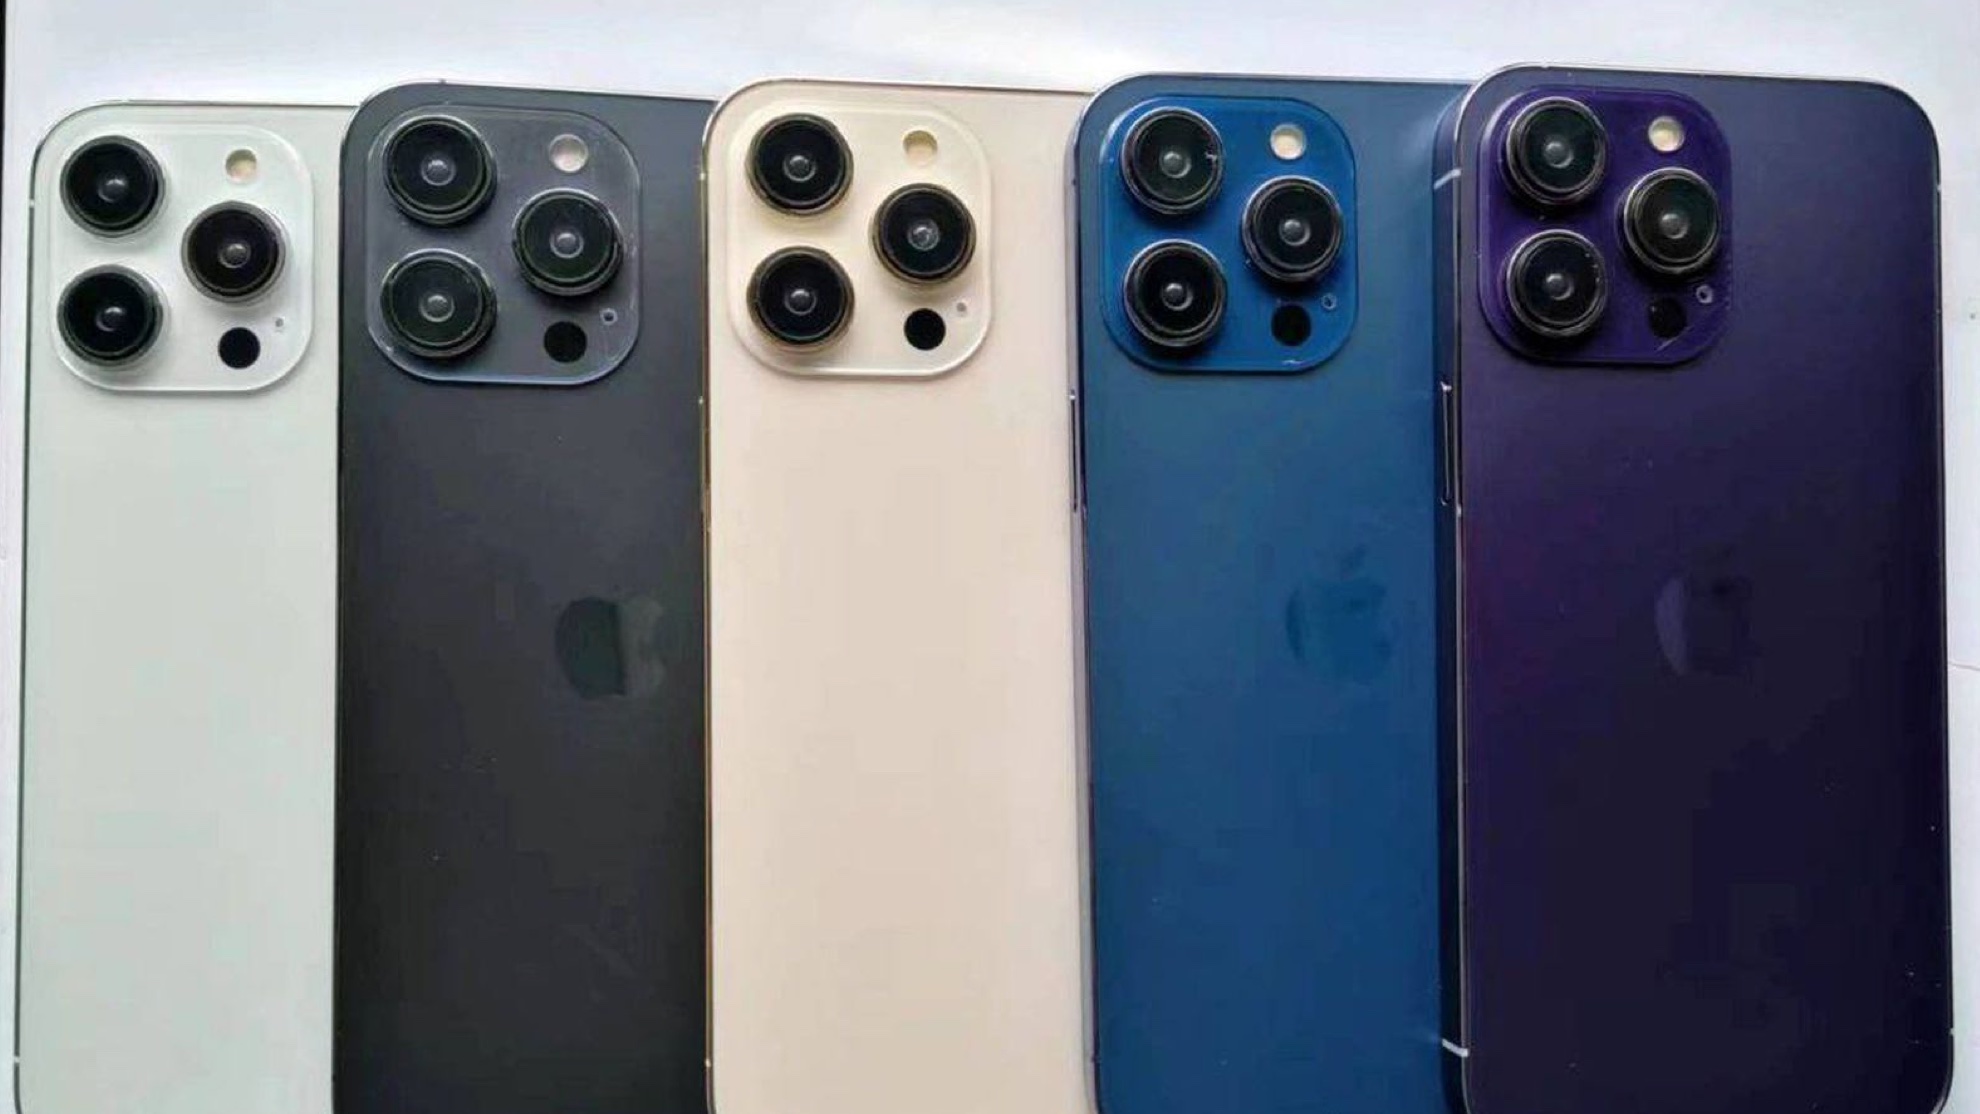 iPhone 14 dummy models in black, blue, cream and white